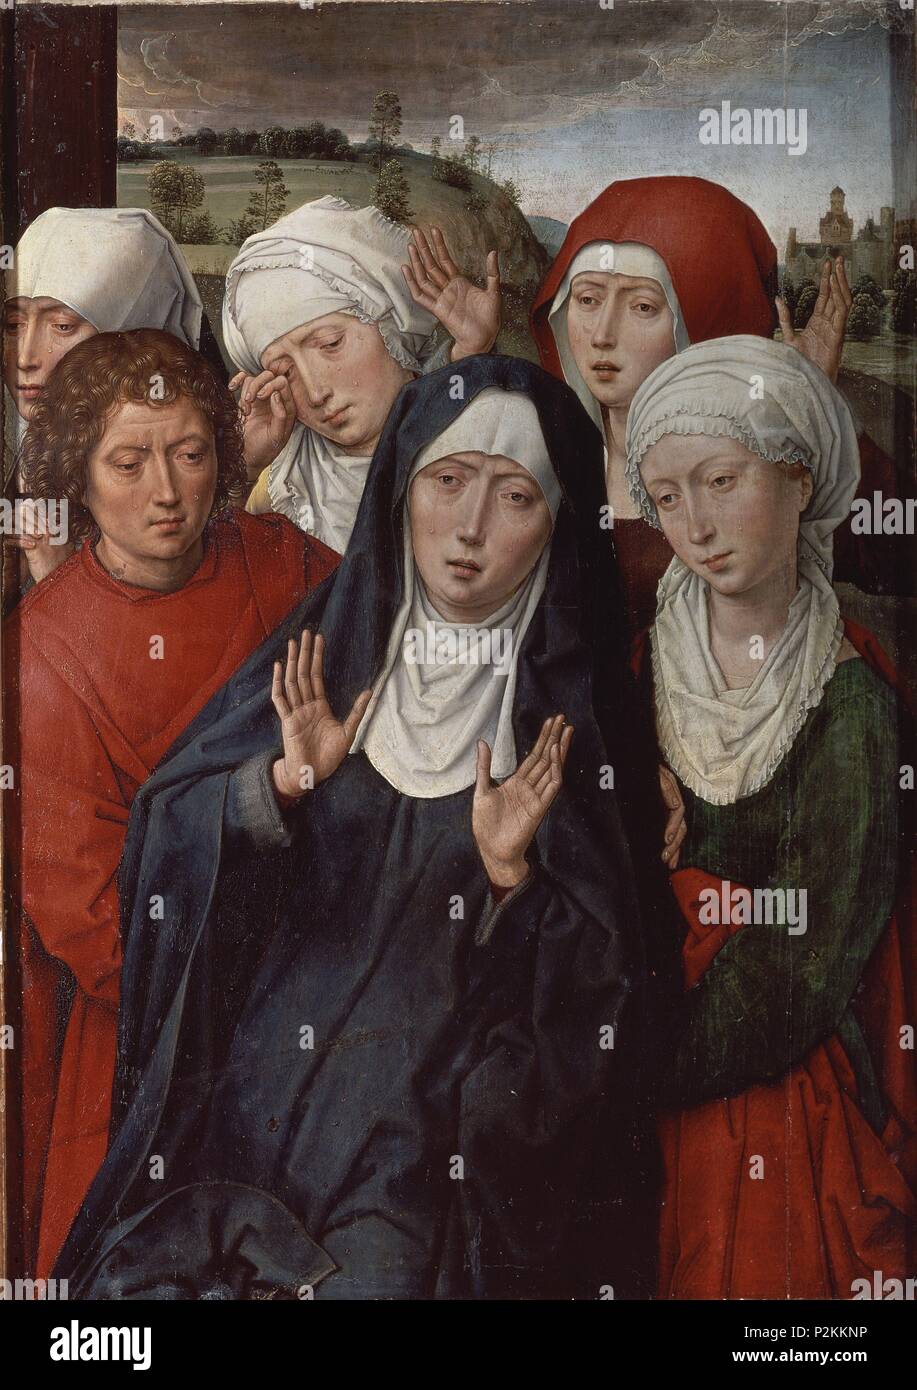 'The Holy Women and Saint John', ca. 1492-1494, Oil on panel, 53,8 x 38,3 cm (Granada diptych, right wing). Author: Hans Memling (c. 1433-1494). Location: CATEDRAL-CAPILLA REAL-INTERIOR, GRANADA, SPAIN. Also known as: LAS SANTAS MUJERES. Stock Photo